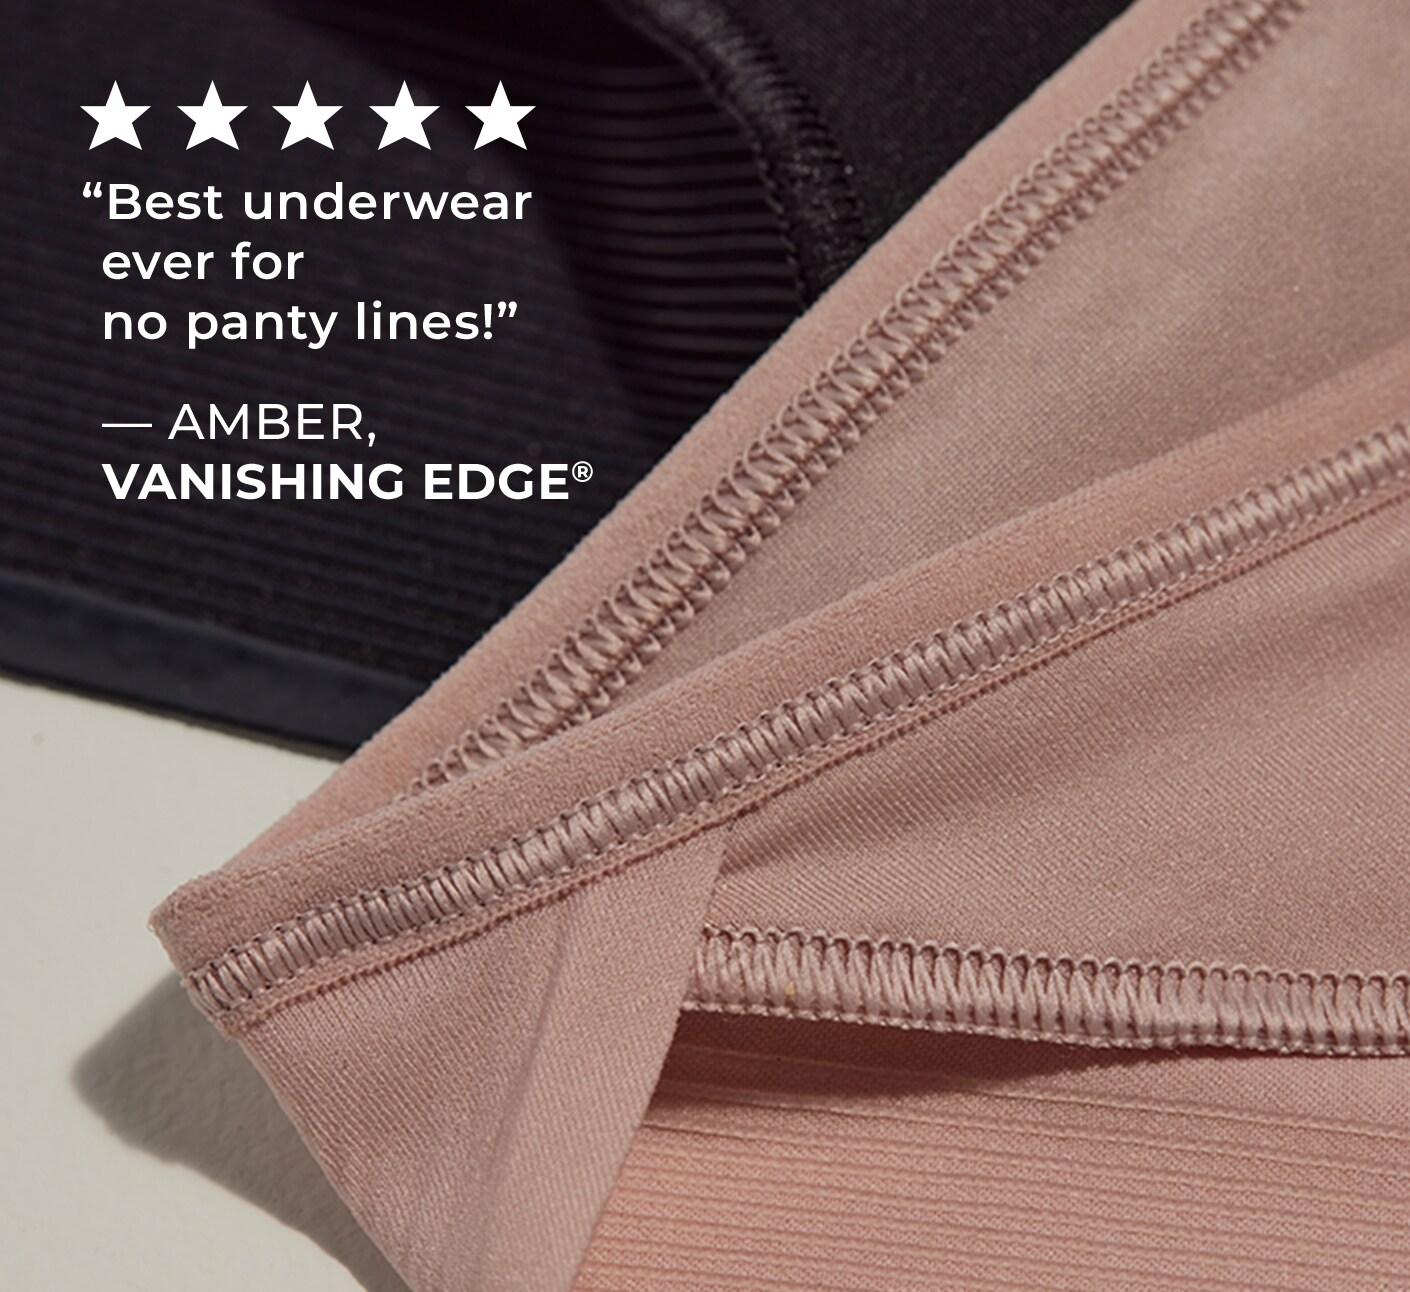 5 Stars Best underwear ever for no panty lines! - Quote from Amber, Vanishing Edge